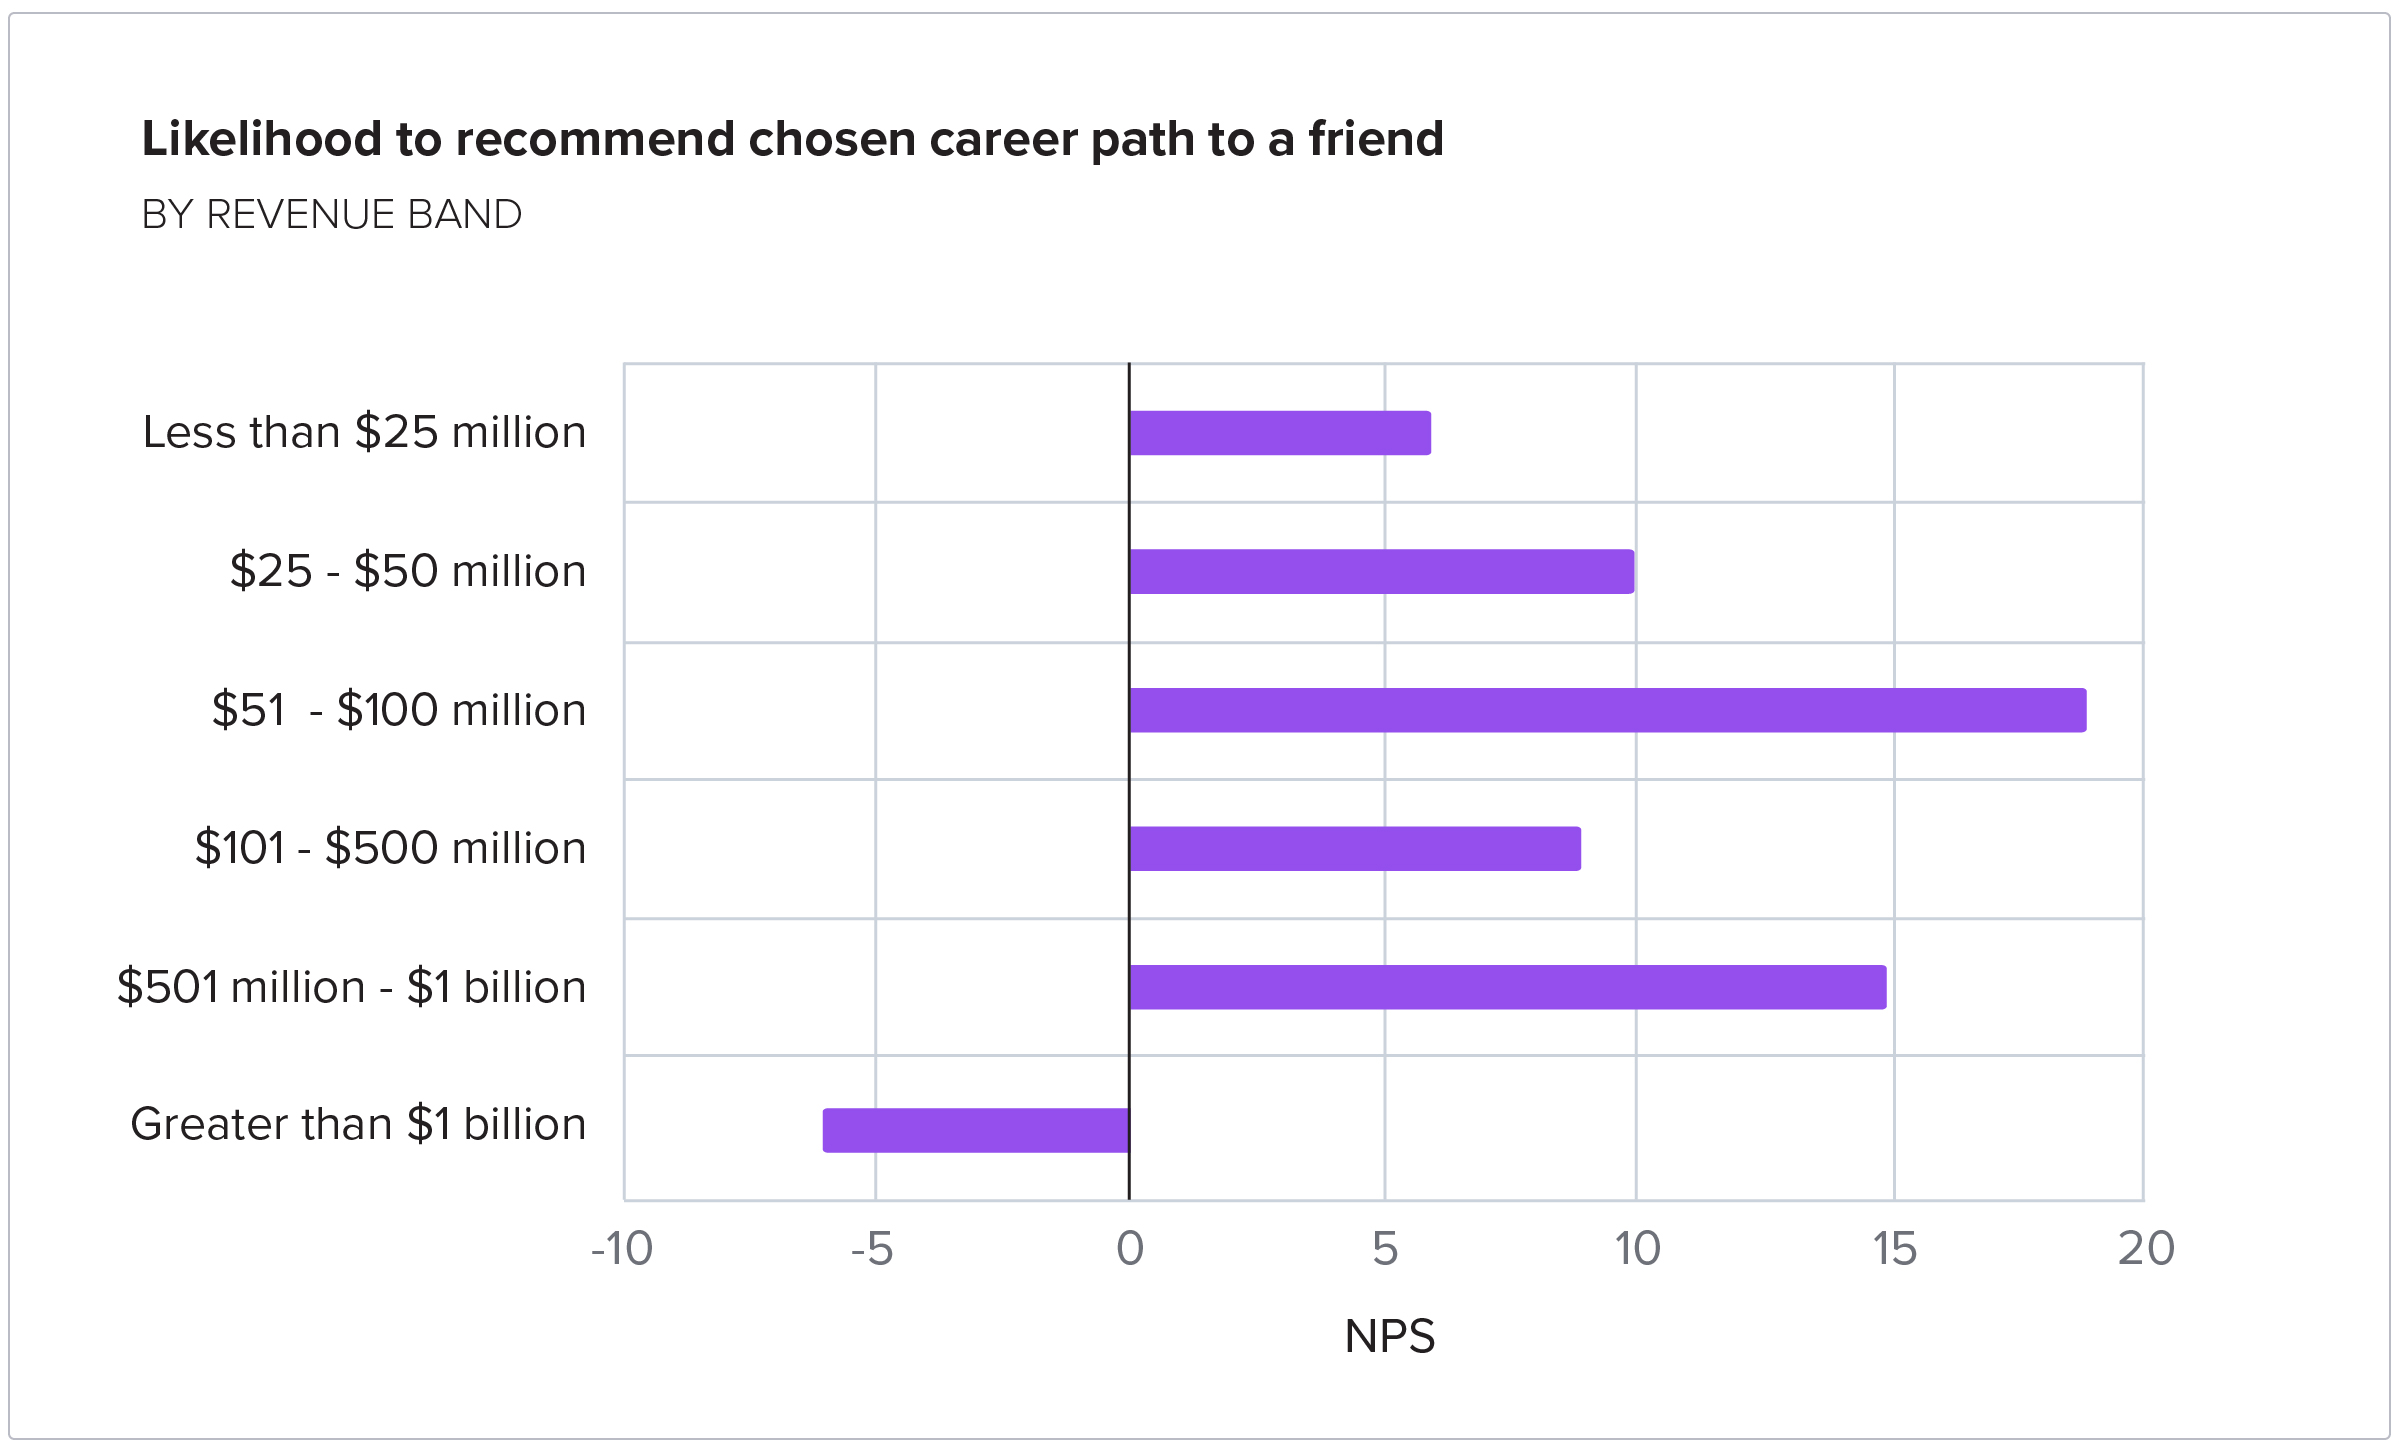 Likelihood to recommend chosen career path to a friend by revenue brand